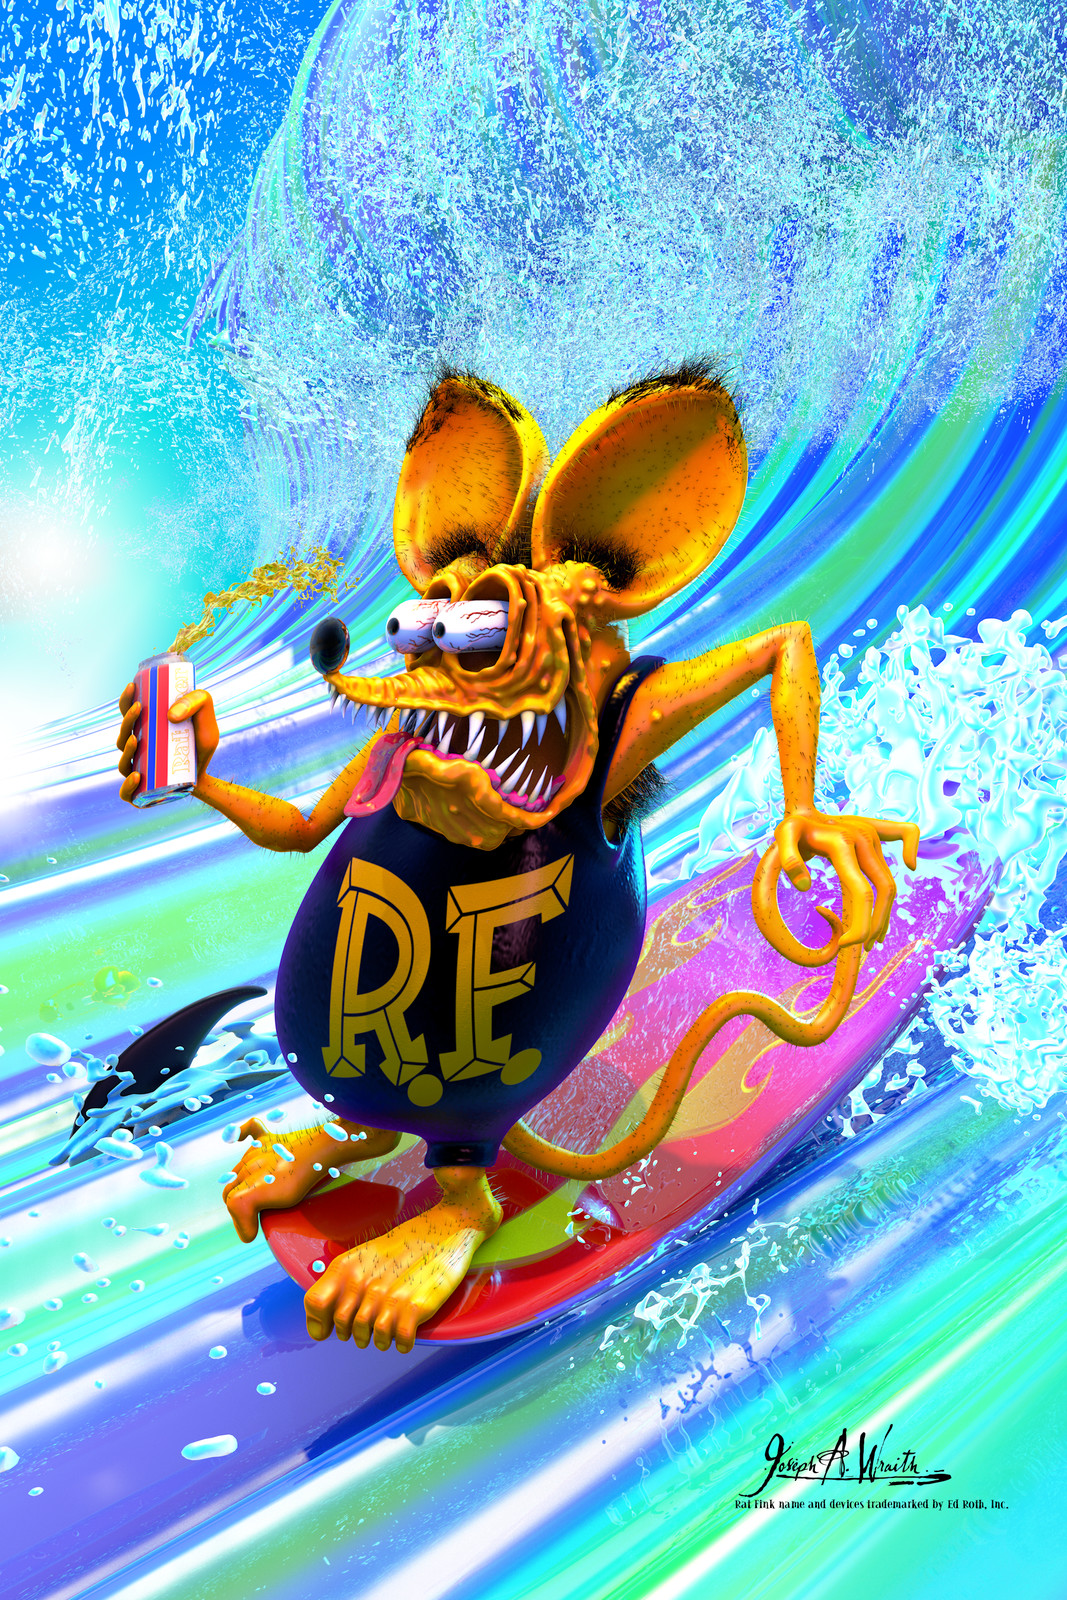 Rat Fink Surfs!
©2018 Copyright, Joseph A. Wraith
Rat Fink name and devices trademarked by Ed Roth, Inc.